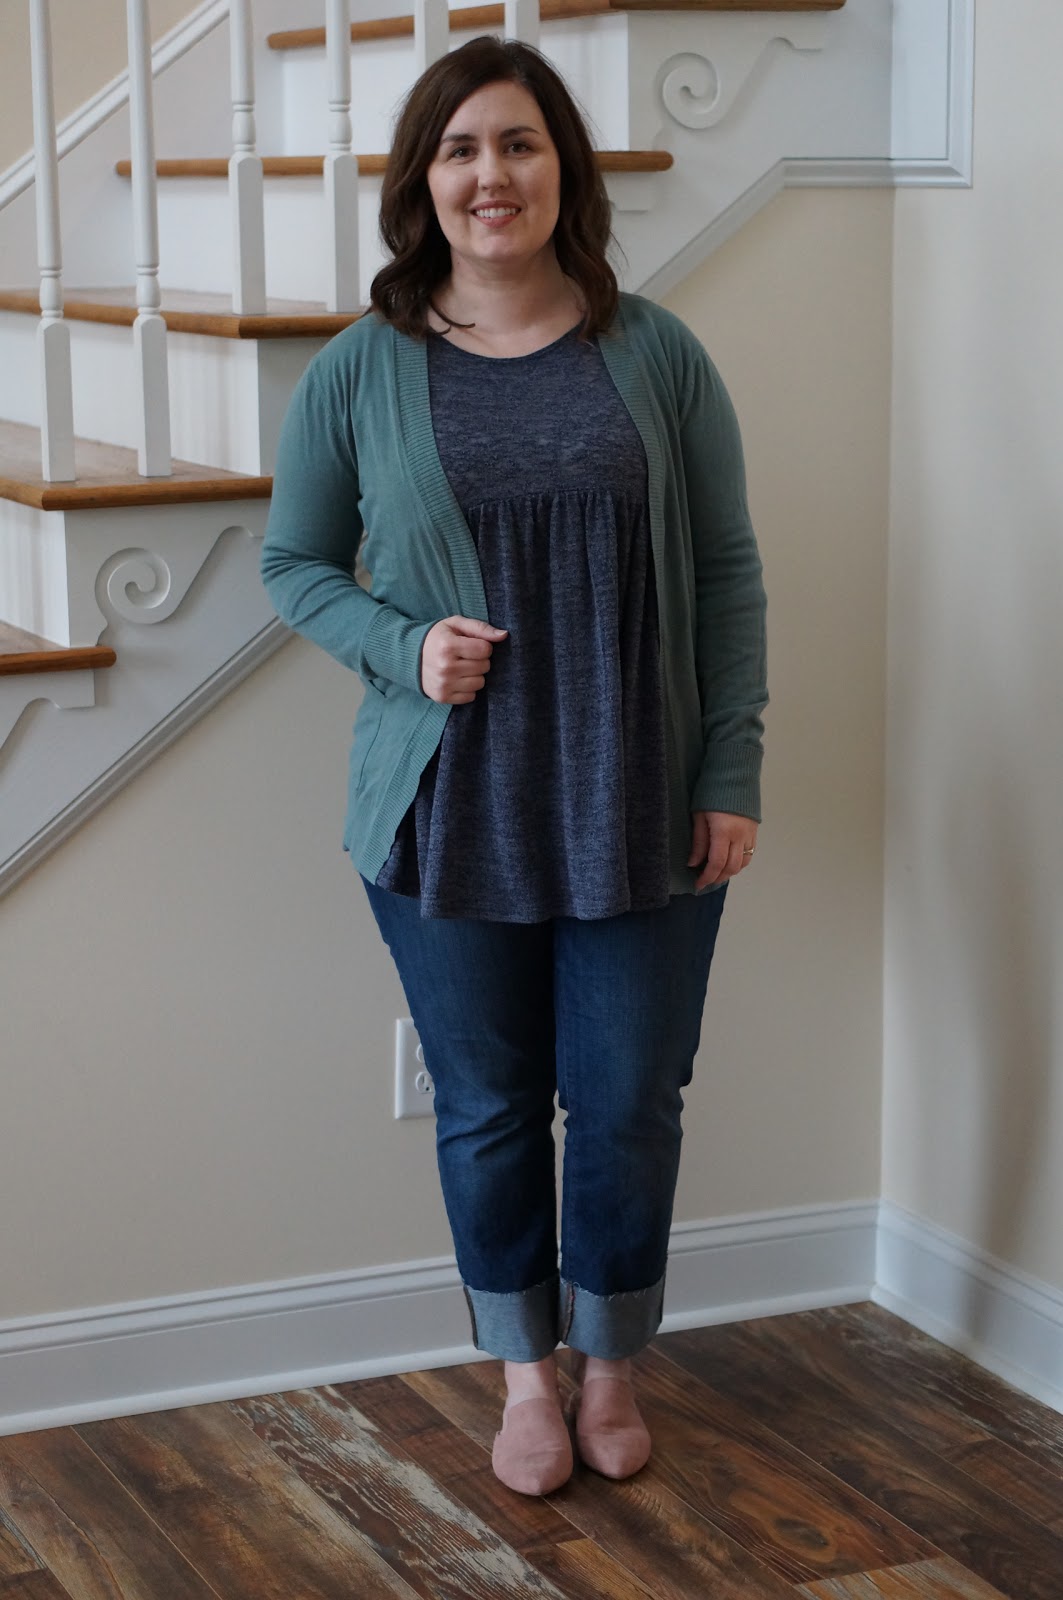 STITCH FIX REVIEW | MARCH 2018 OUTFITS by popular North Carolina style blogger Rebecca Lately